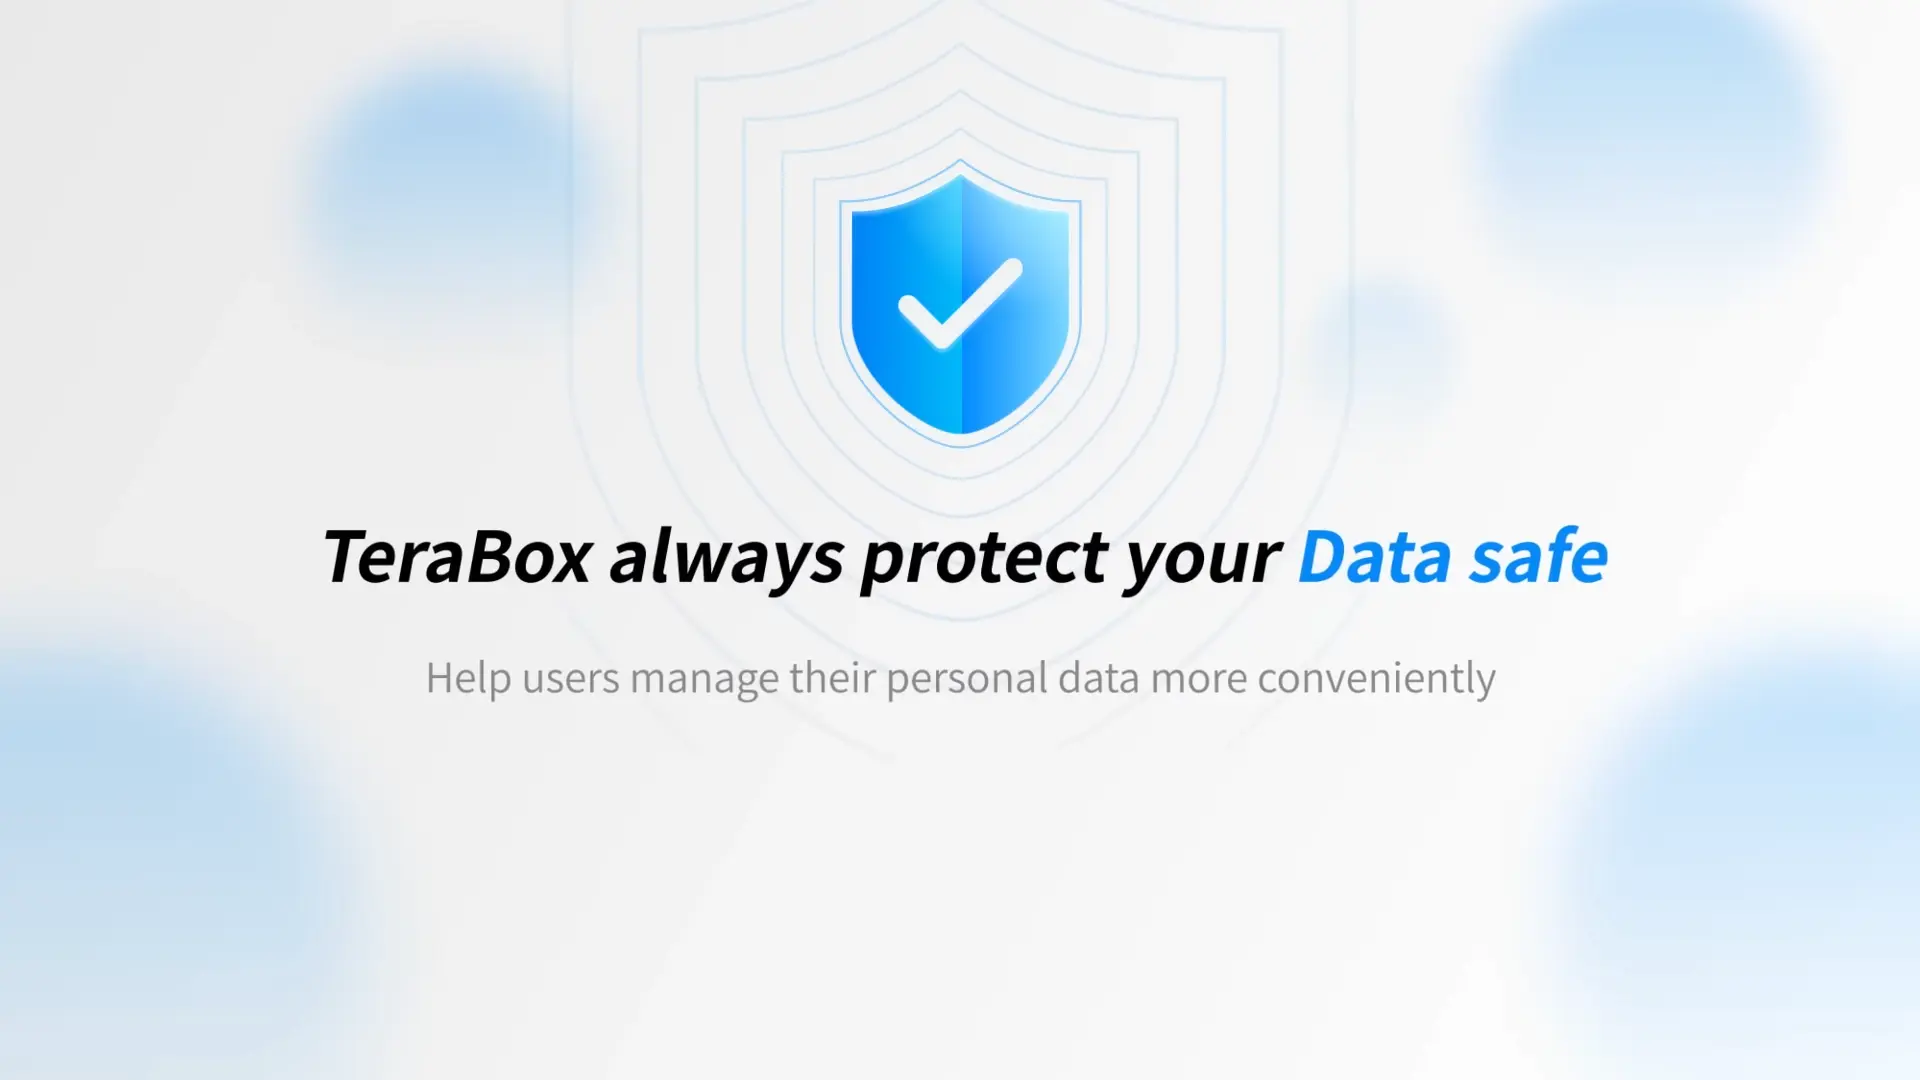 Terabox safety & privacy